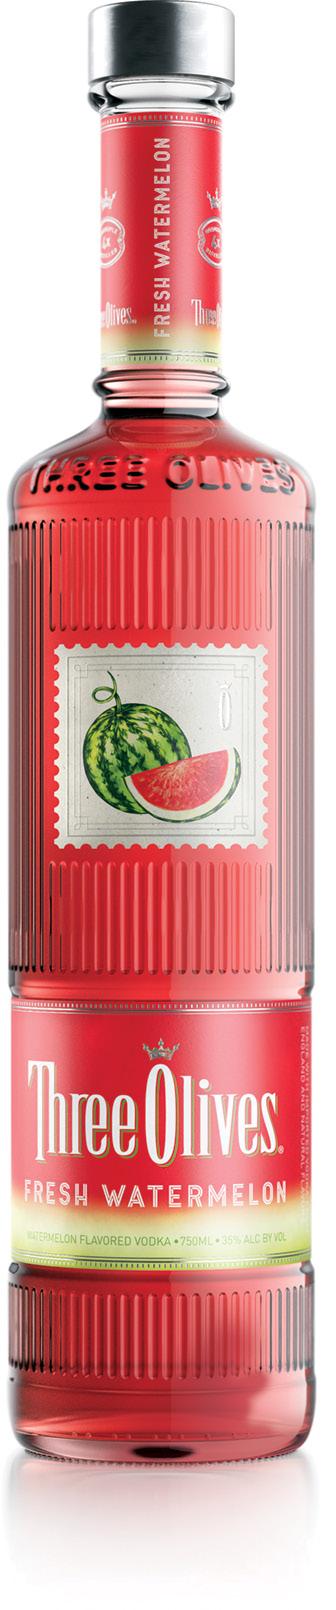 FRESH & DELICIOUS FRESH WATERMELON A delicious mix of fresh watermelon flavor with just a hint of citrus for a refreshingly mixable flavor.